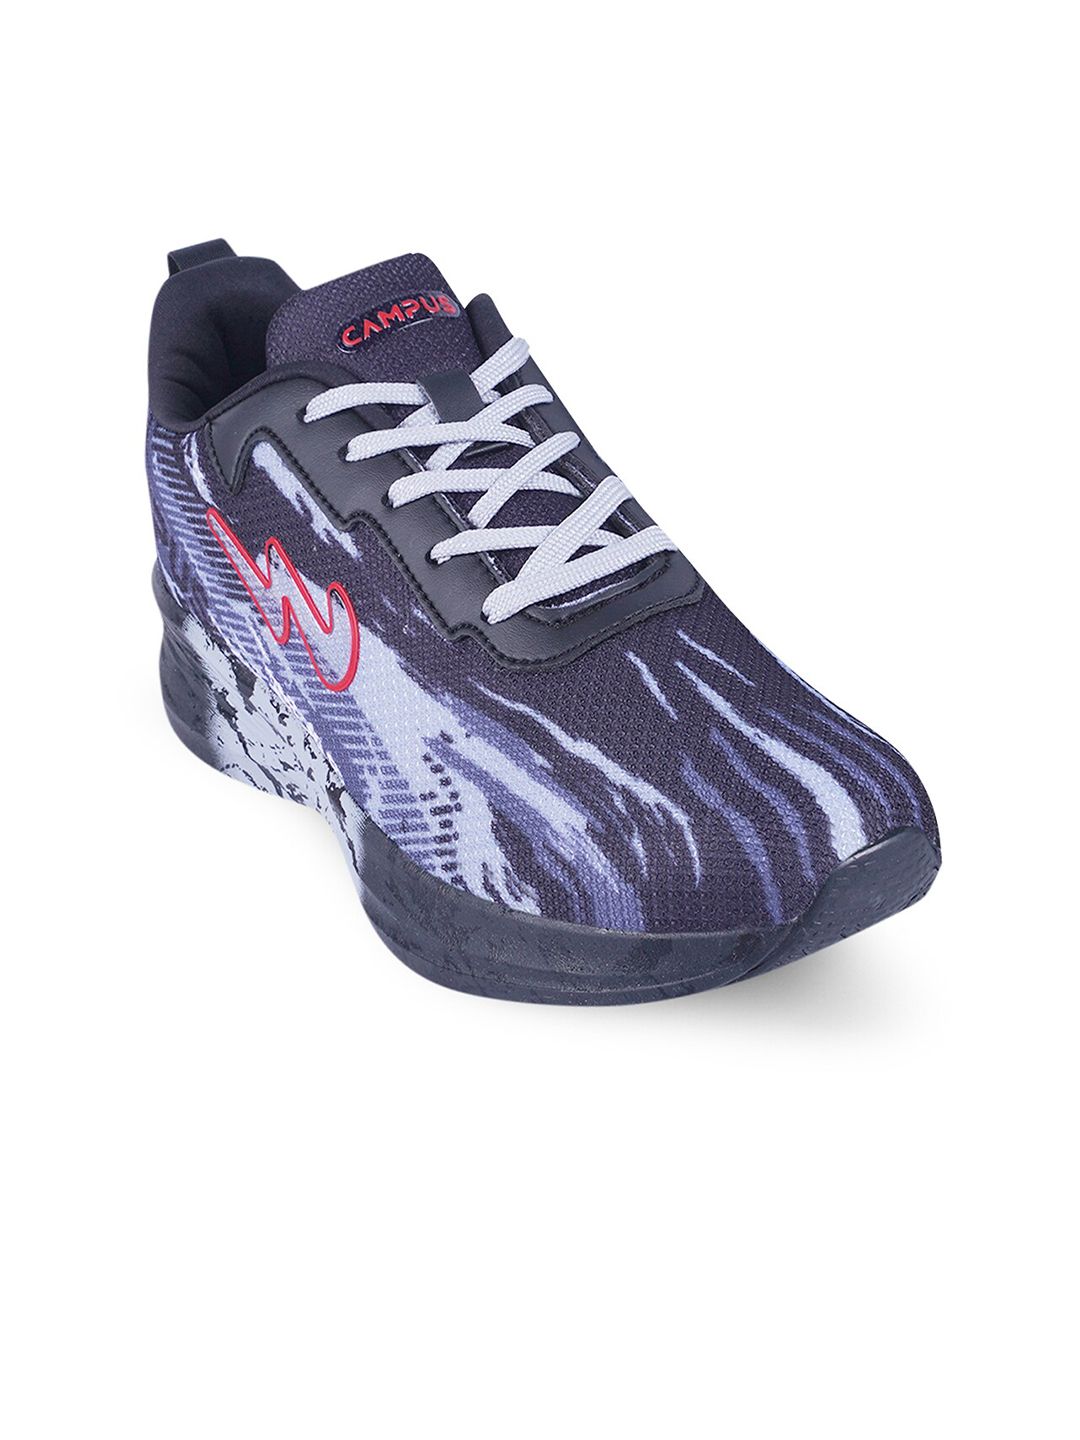 Campus Women Navy Blue Printed Mesh Running Shoes Price in India